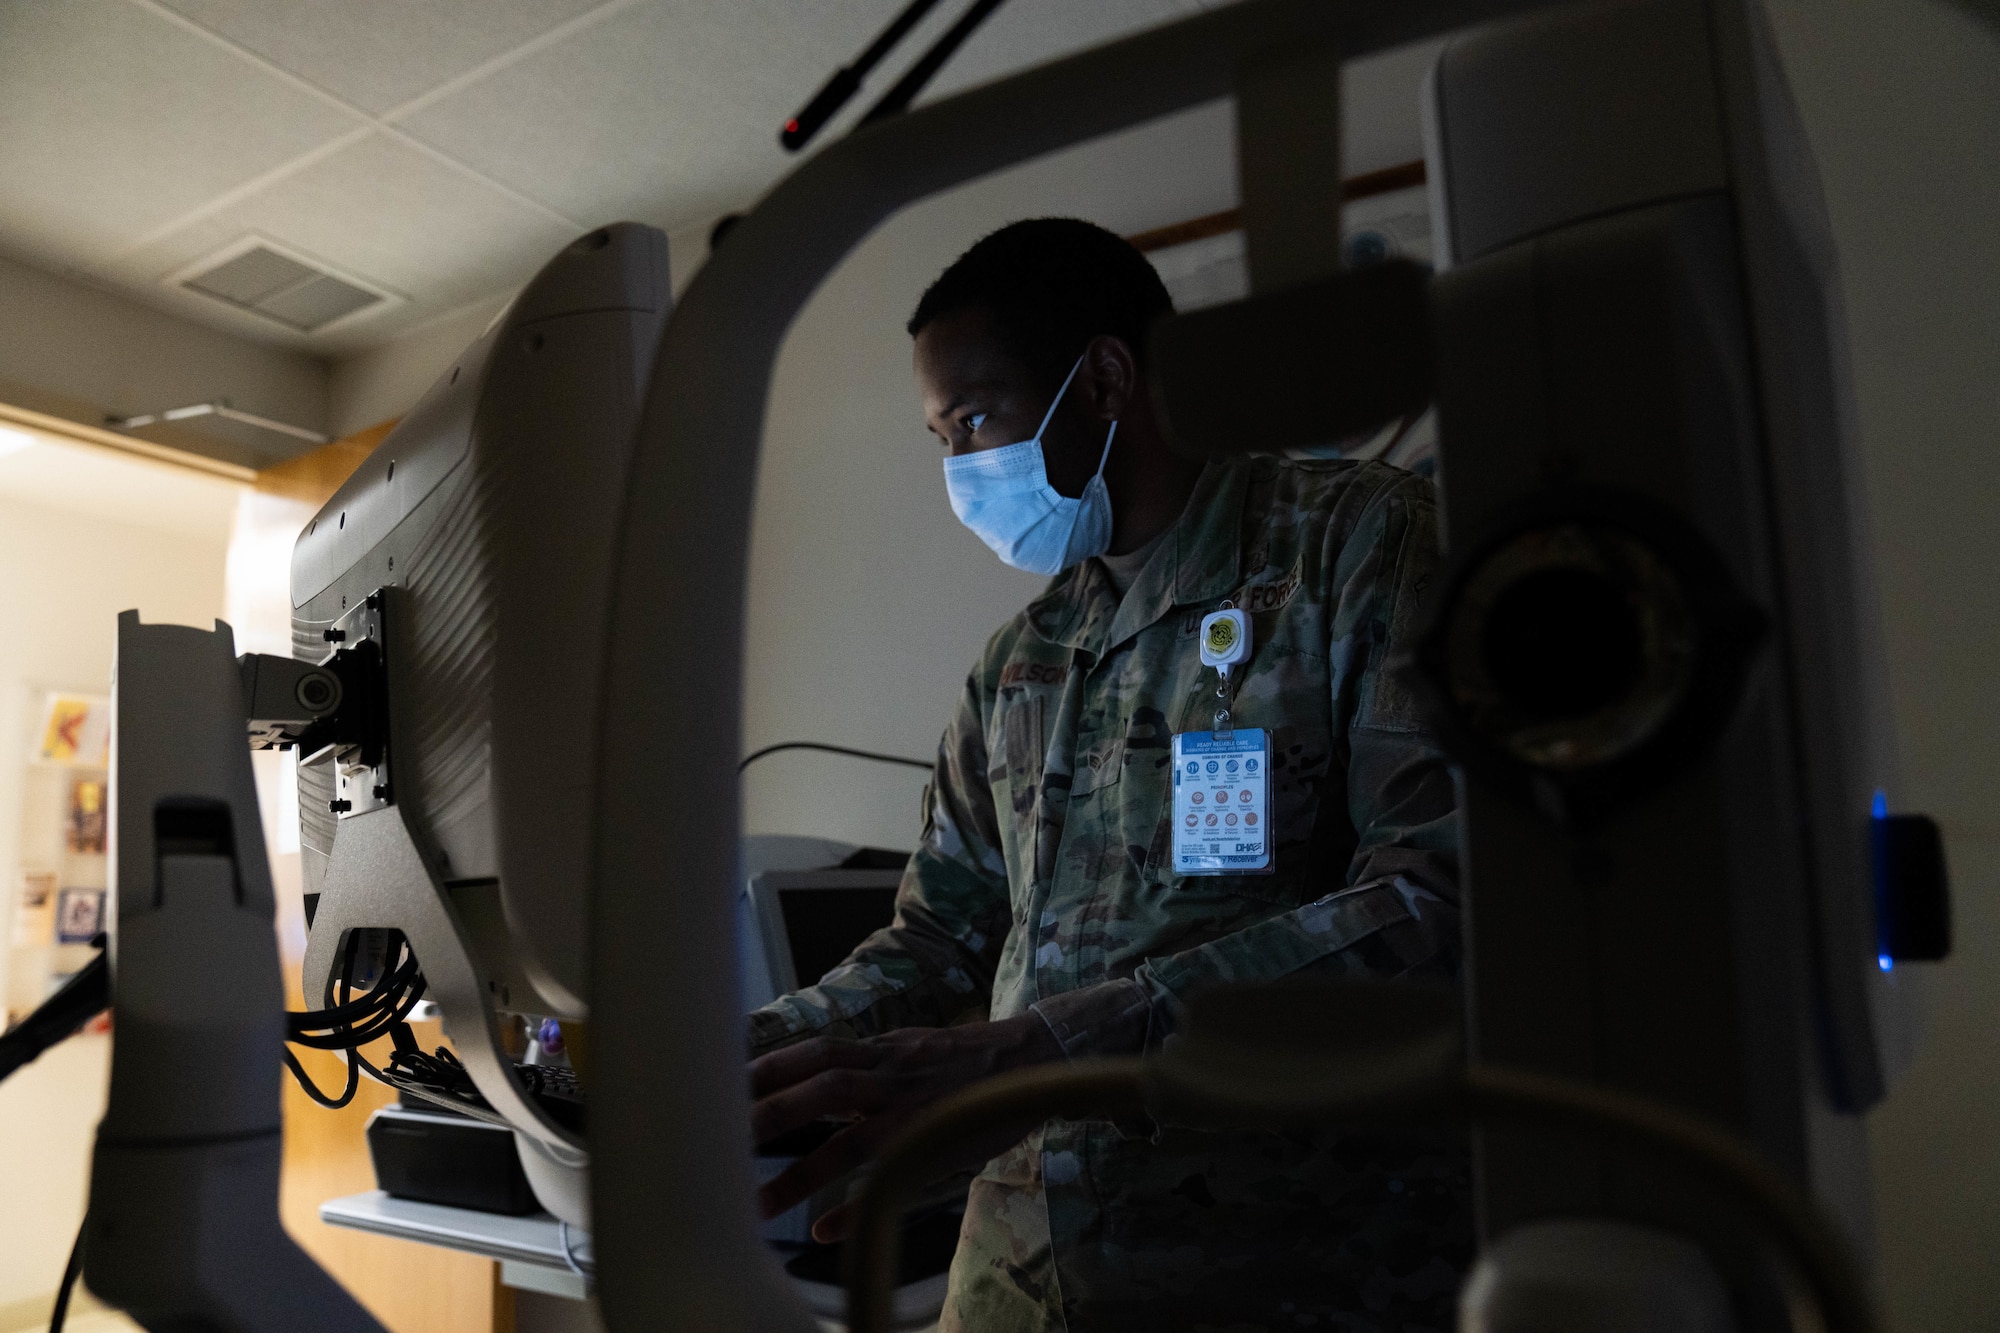 Senior Airman Denzel Wilson, 15th Operational Medical Readiness Squadron optometry technician, operates a retinal camera at the optometry clinic at Joint Base Pearl Harbor-Hickam, Hawaii, June 16, 2022. Eye exams and detailed photographs of the retina accurately document and track health changes to the eyes throughout the years. (U.S. Air Force photo by Airman 1st Class Makensie Cooper)